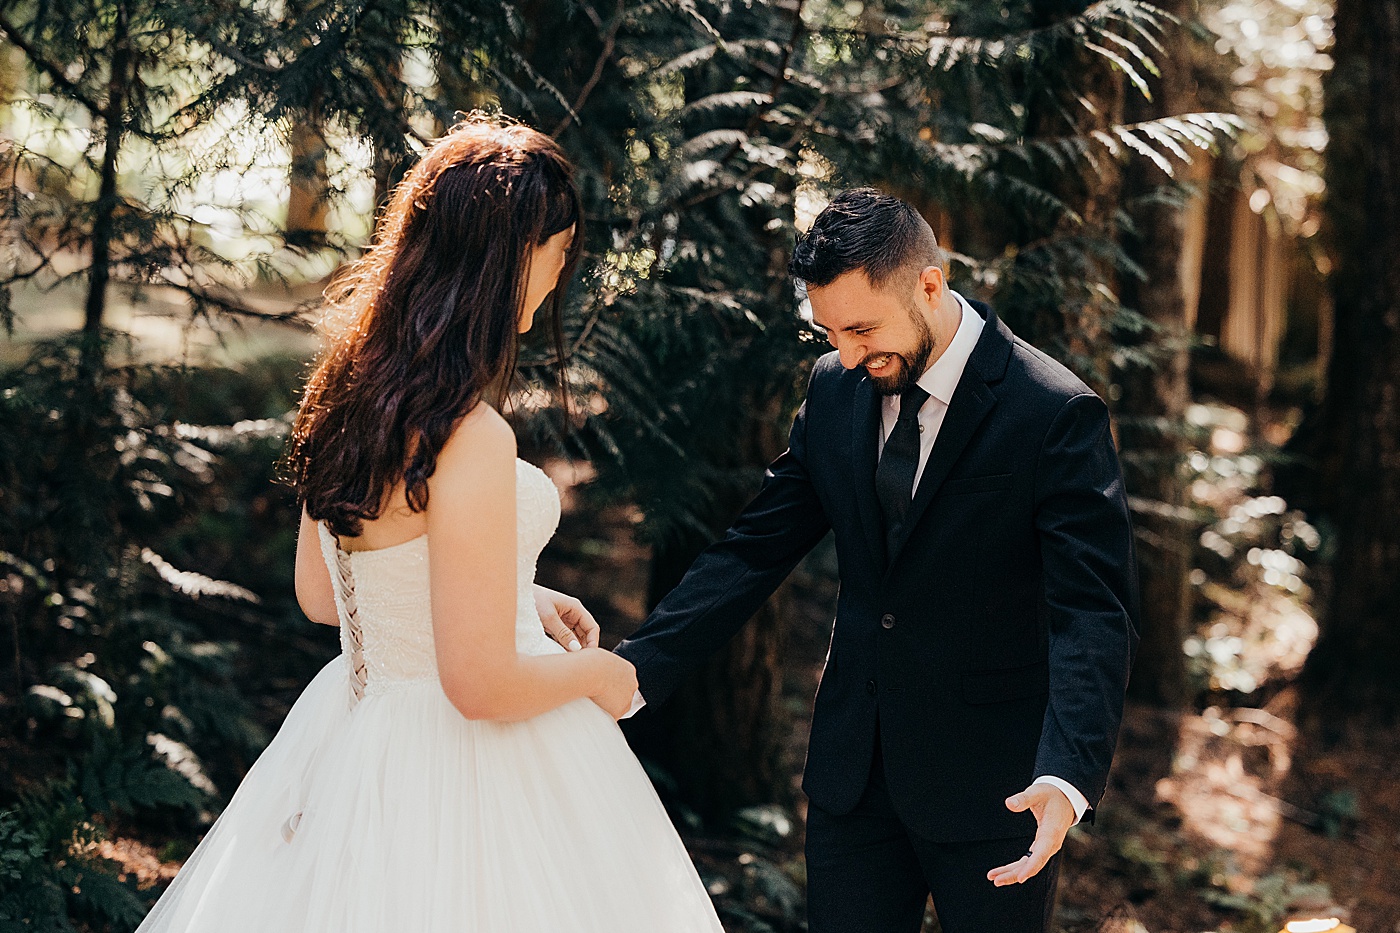 Grooms first impression of bride during first look | Photo by Megan Montalvo Photography